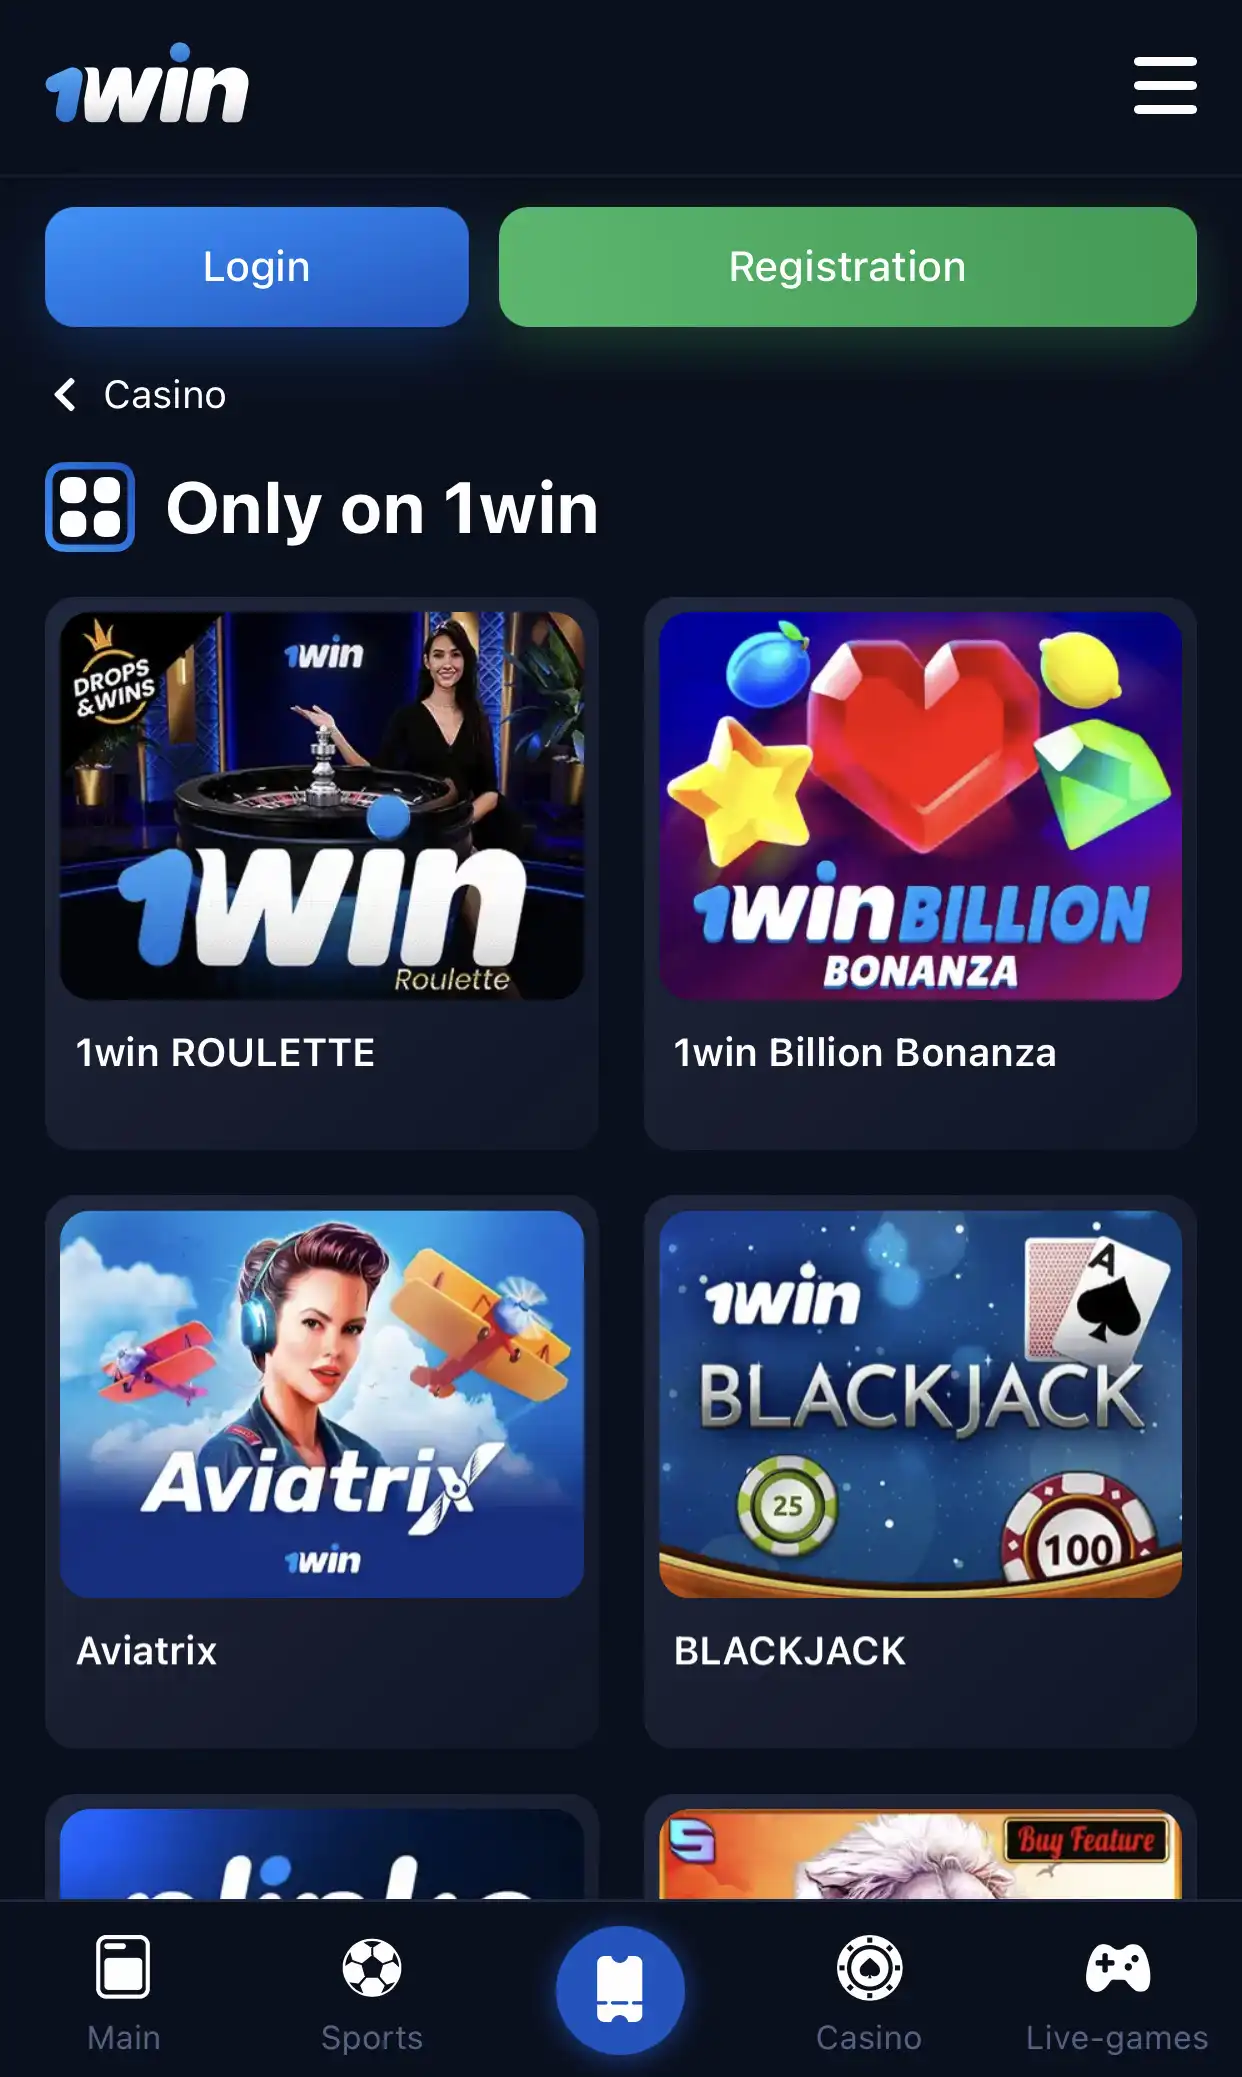 Play exclusively featured games at 1win casino and win money.